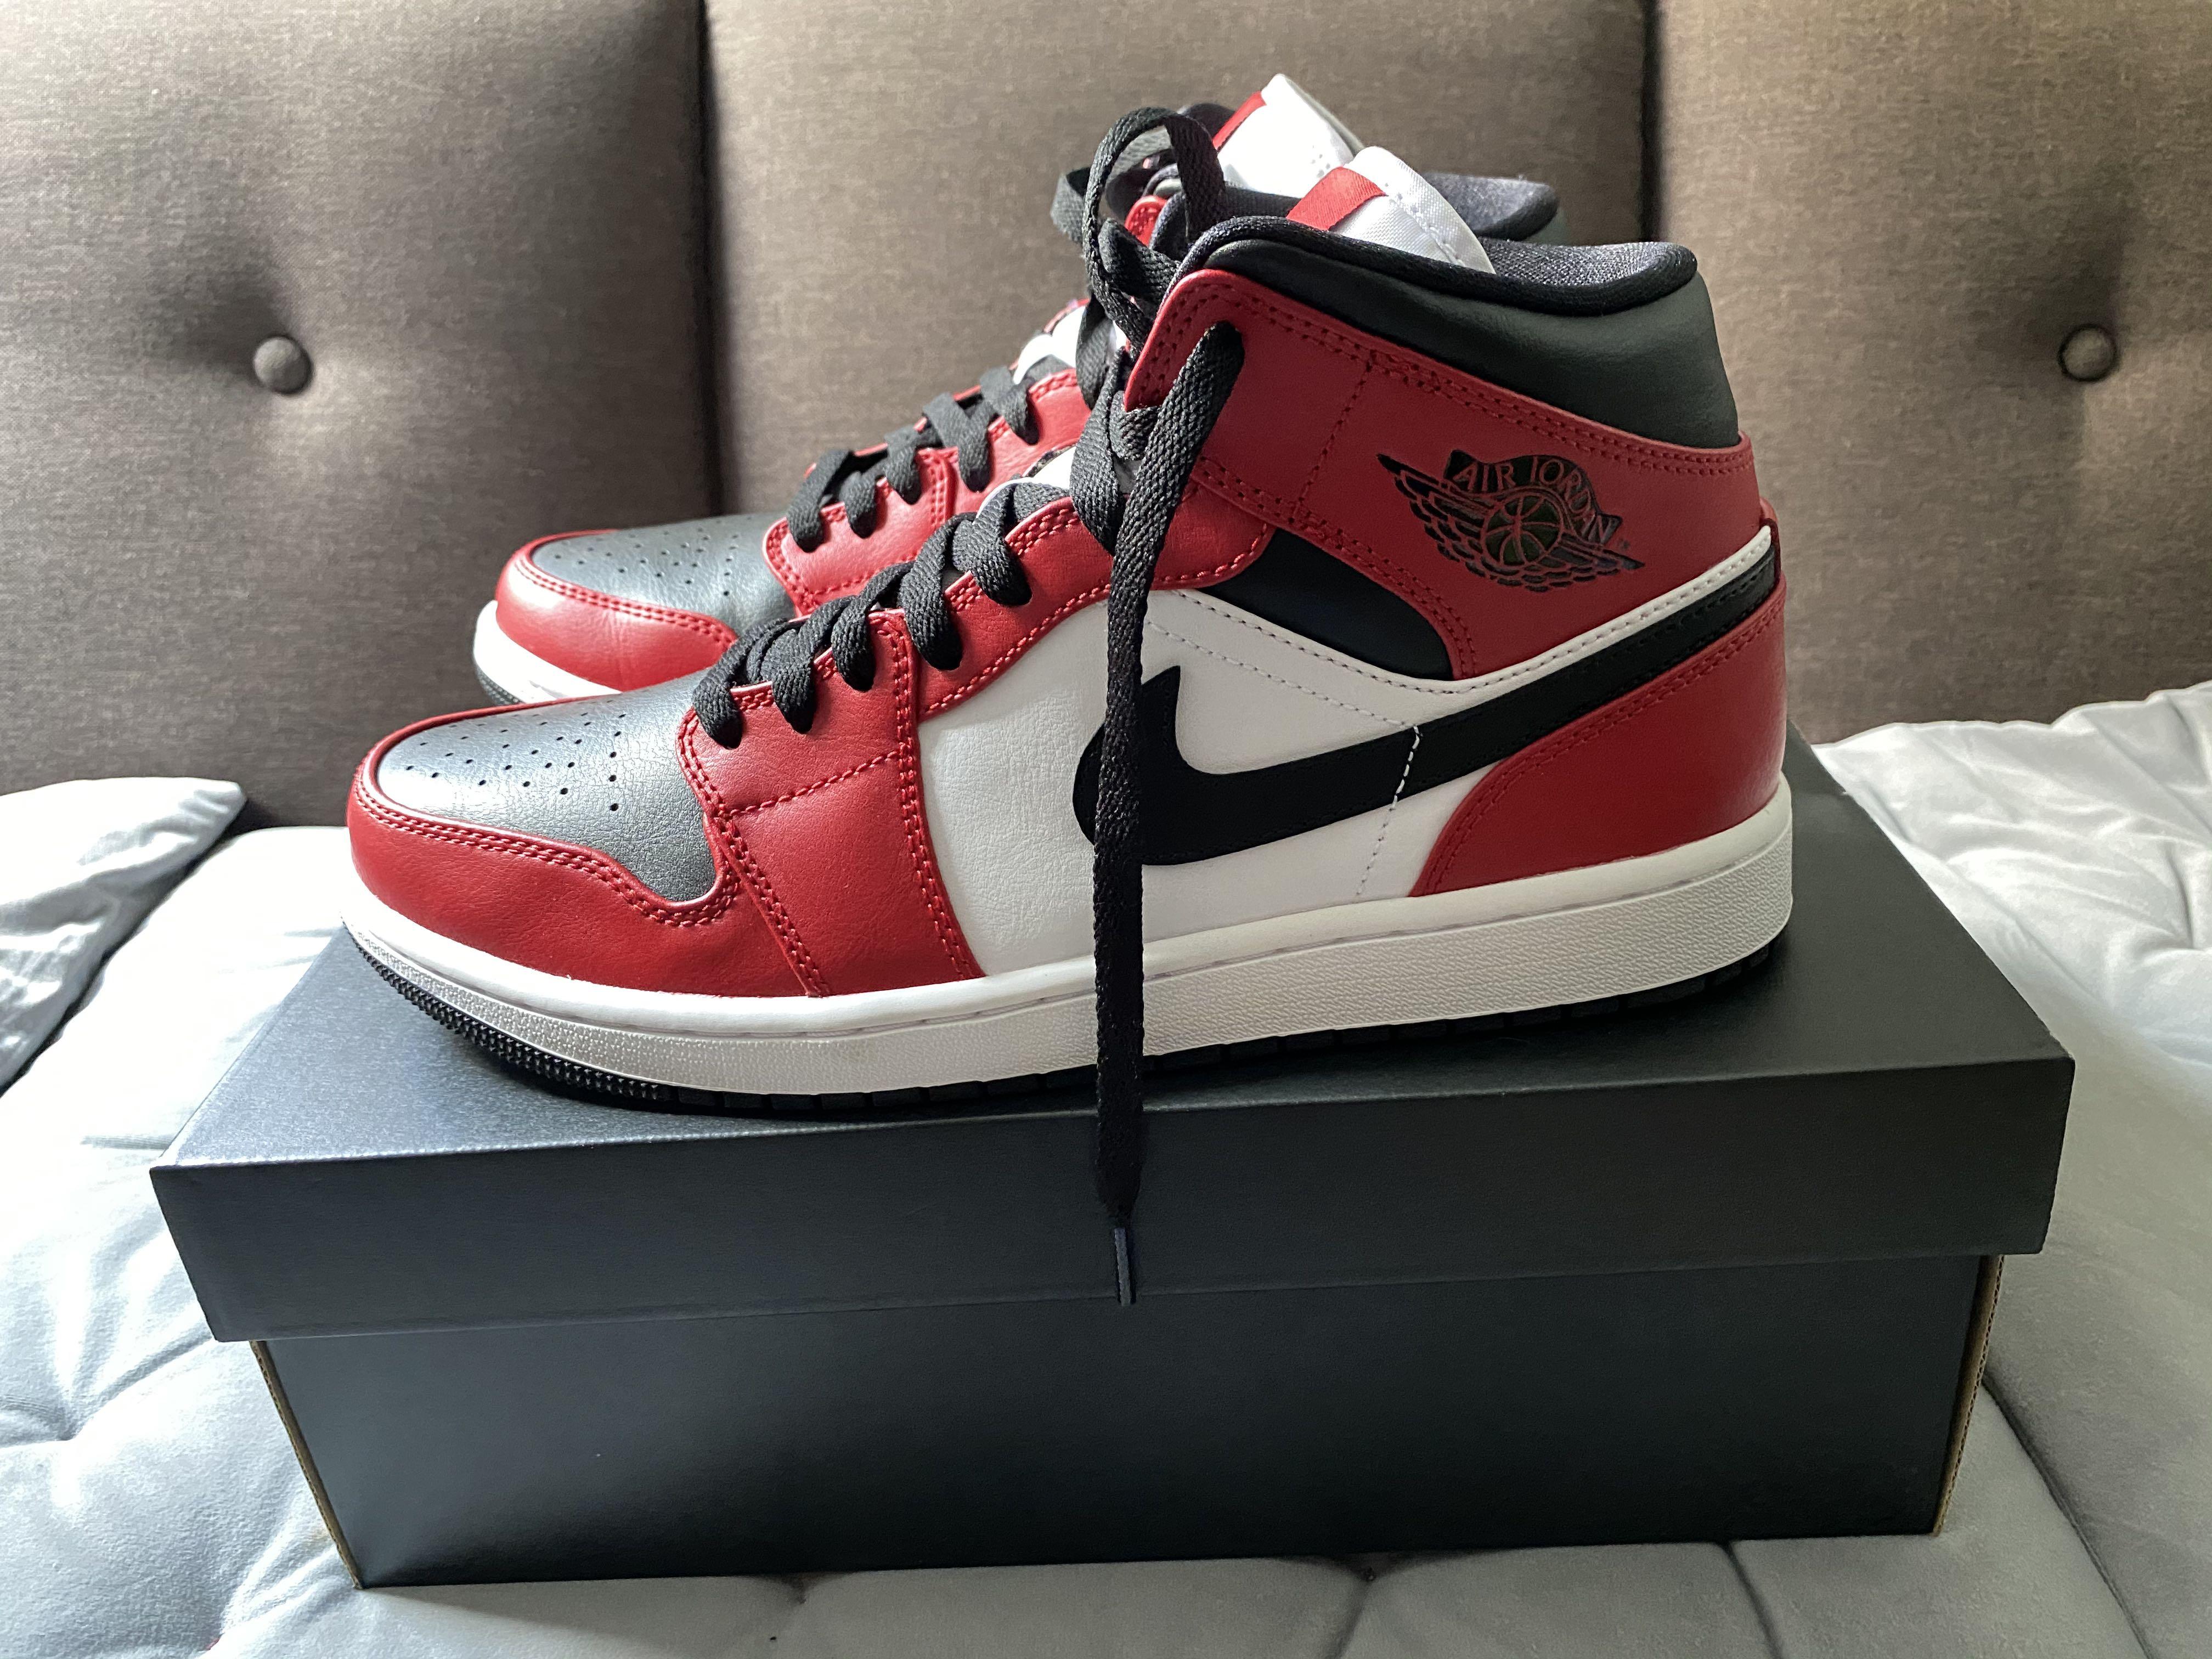 chicago jordan 1 outfit